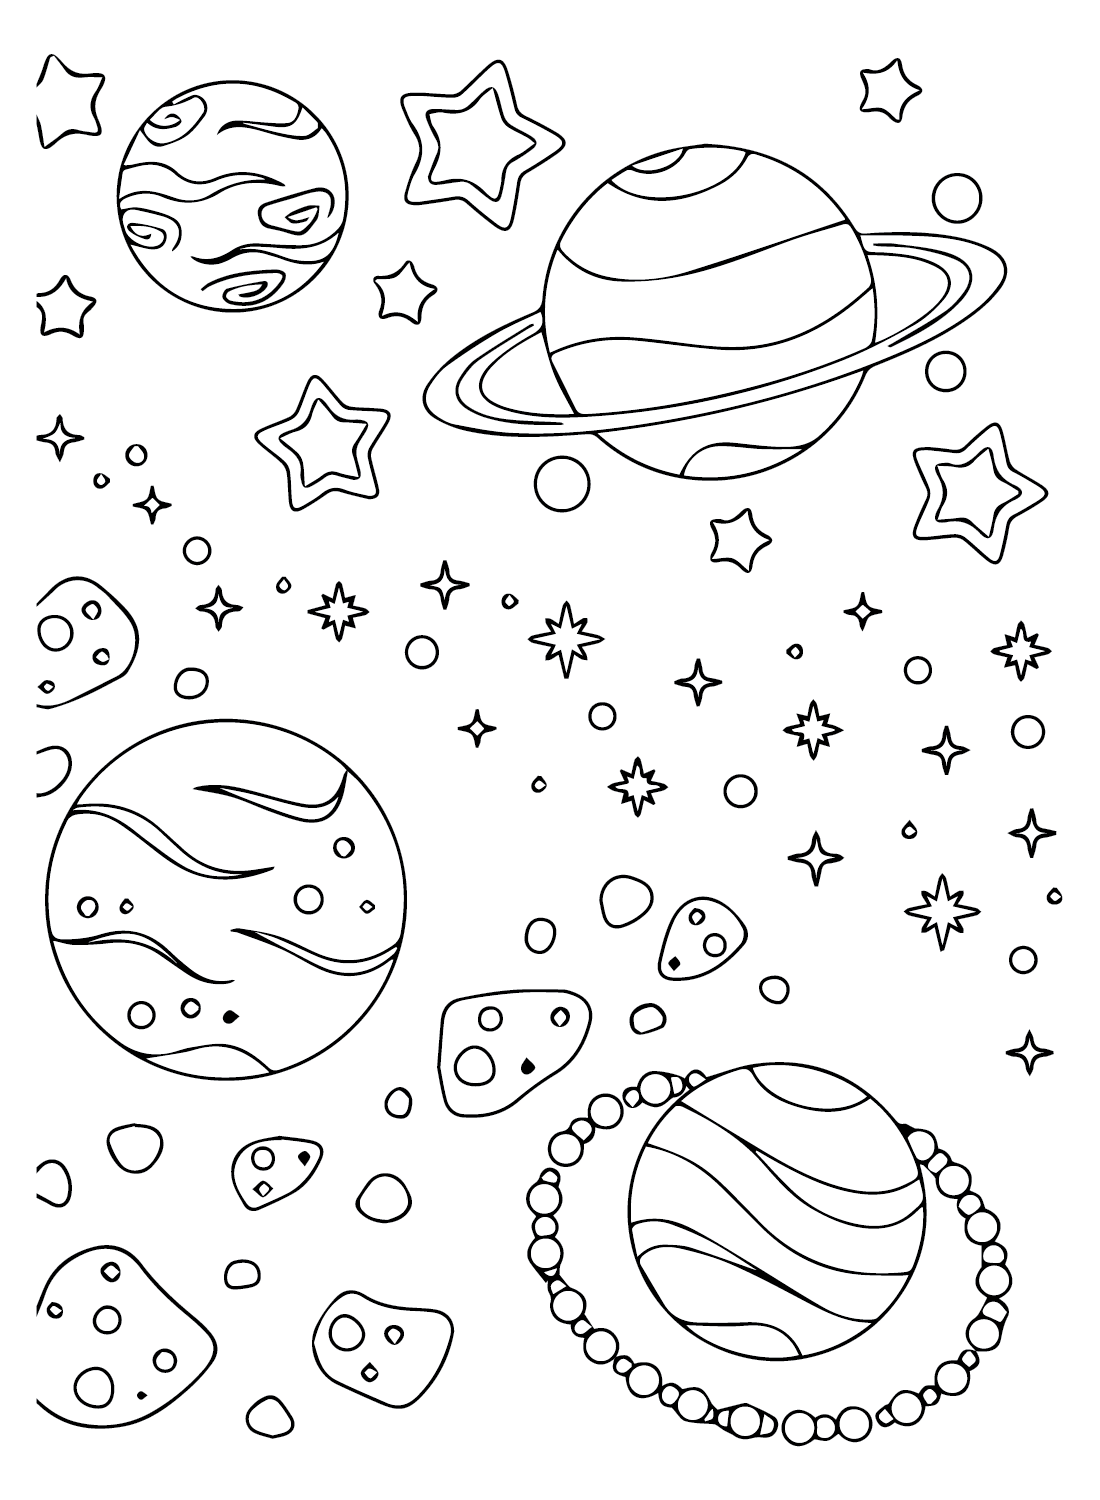 Galaxy Coloring Pages Printable for ...